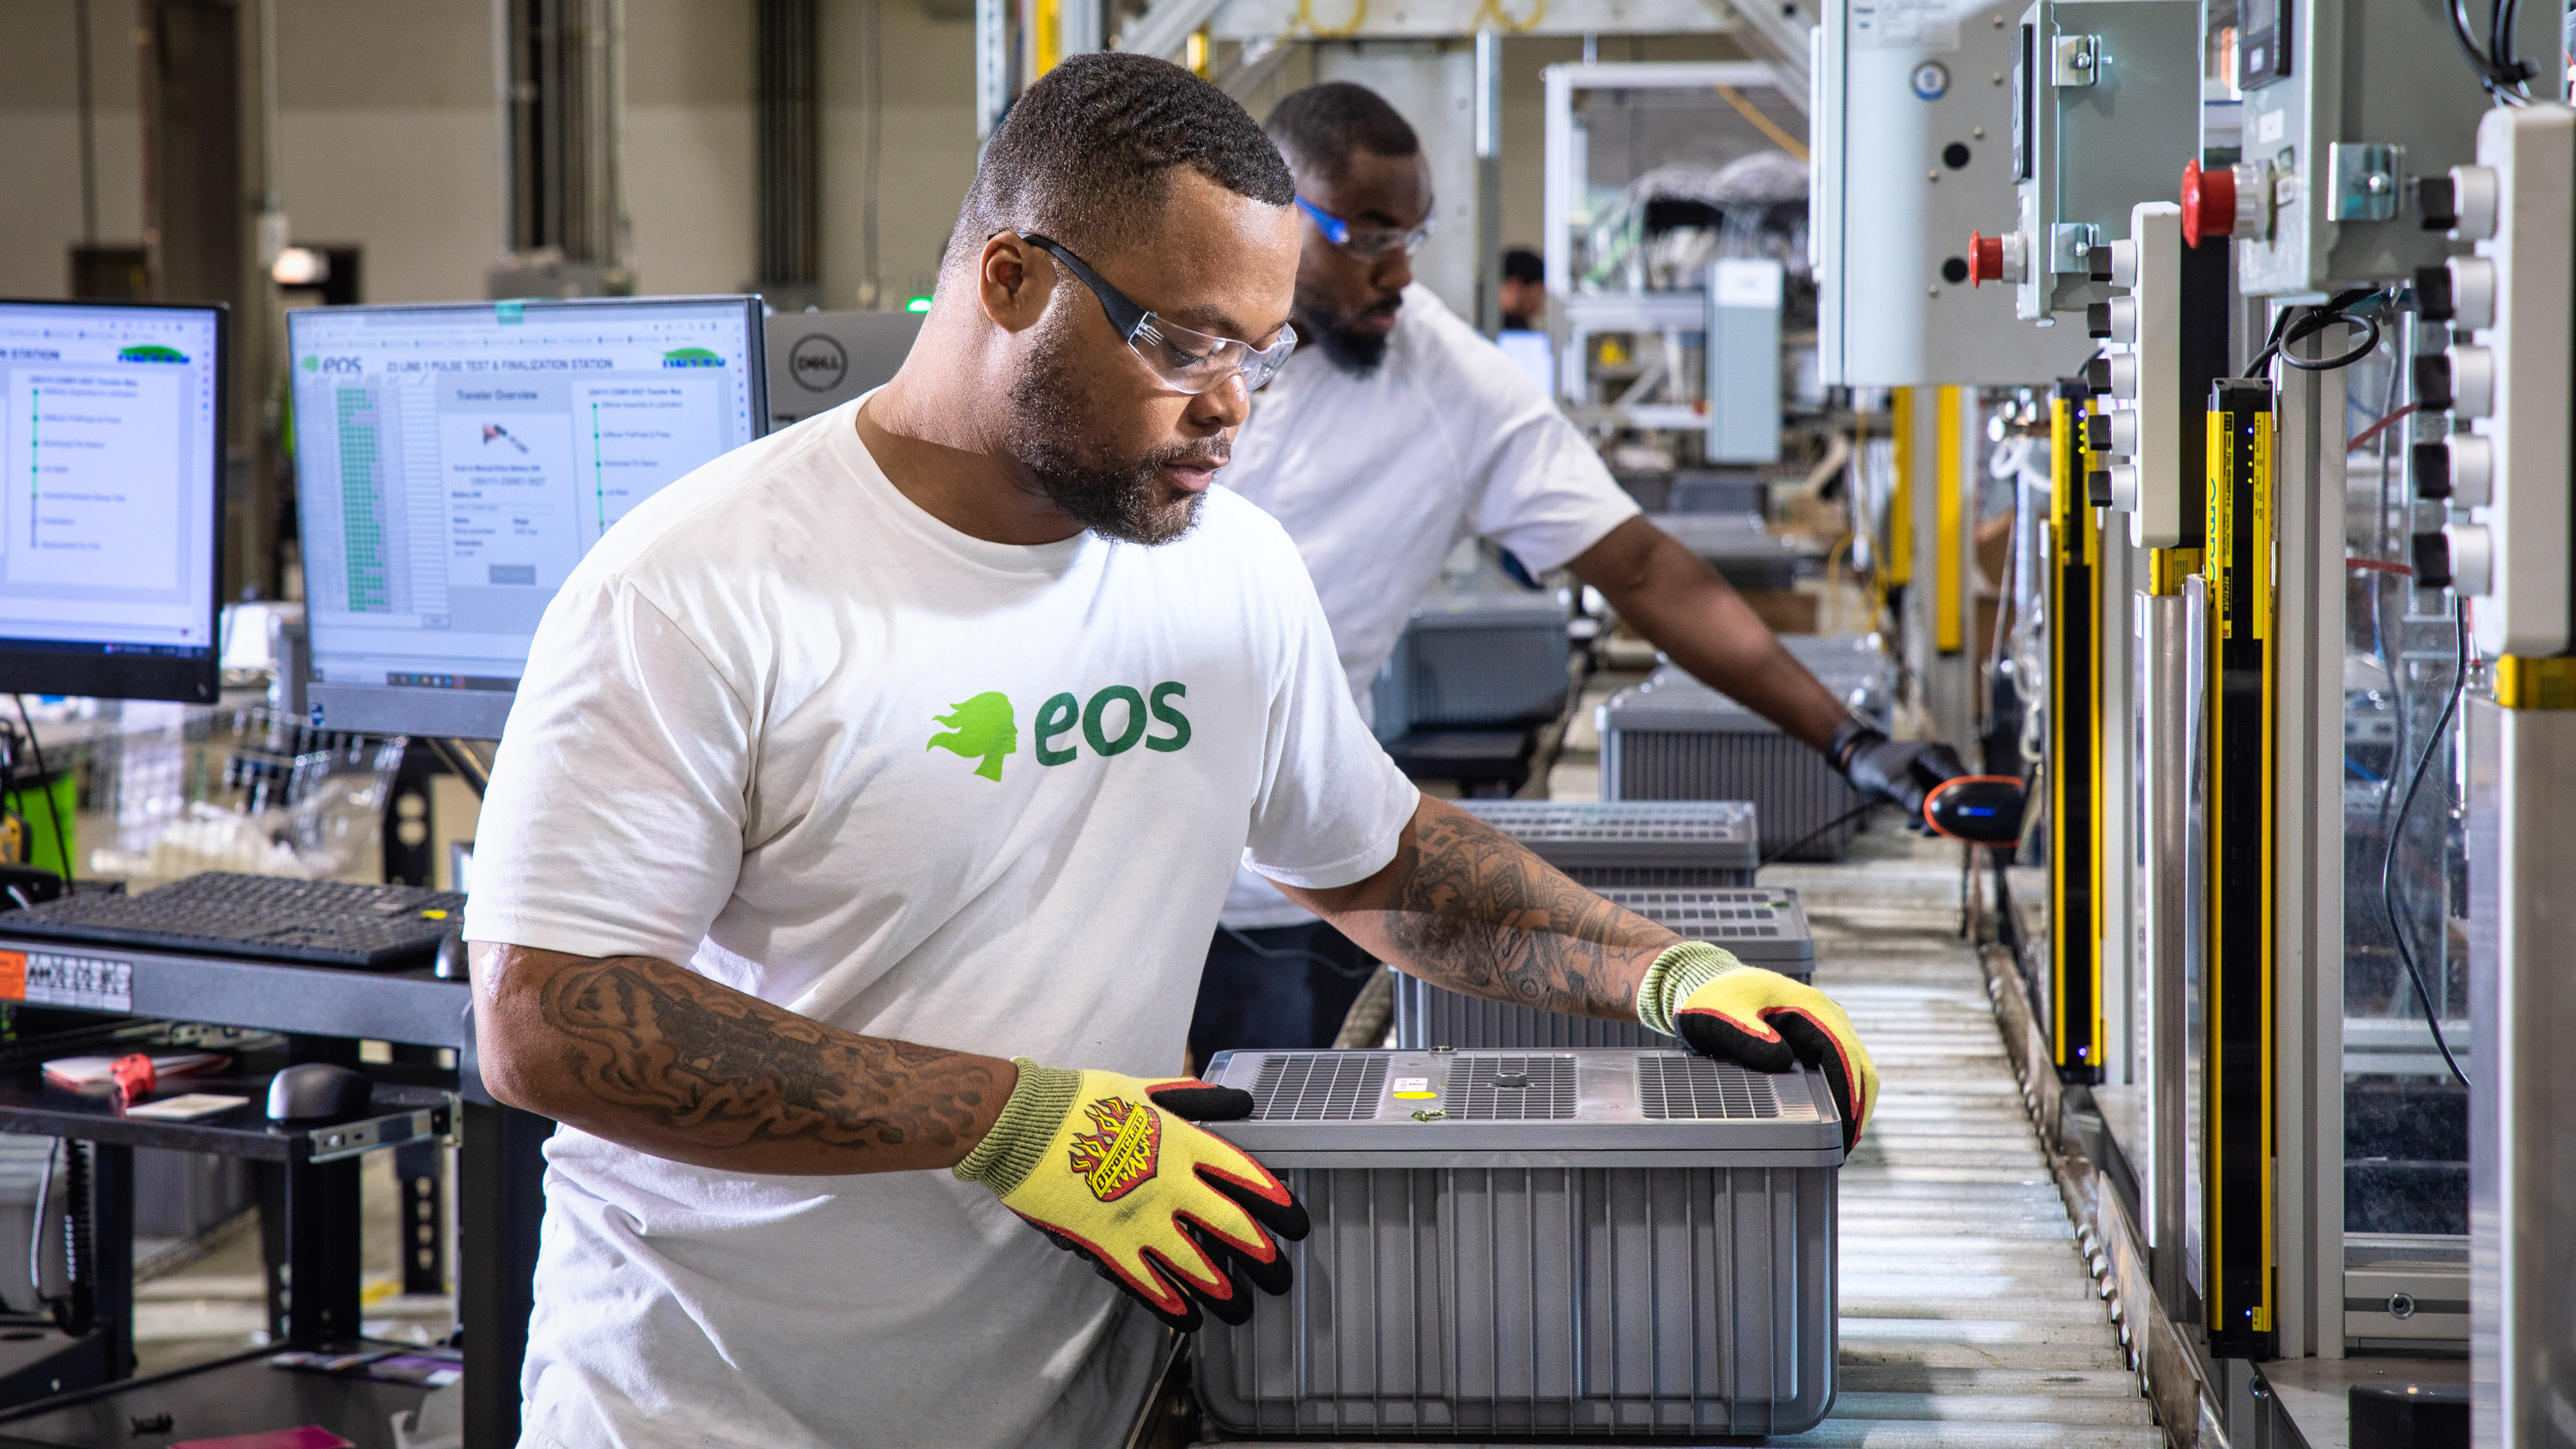 Employees Joe Jackson and Baron Mason testing batteries as a final product at the eos assembly line